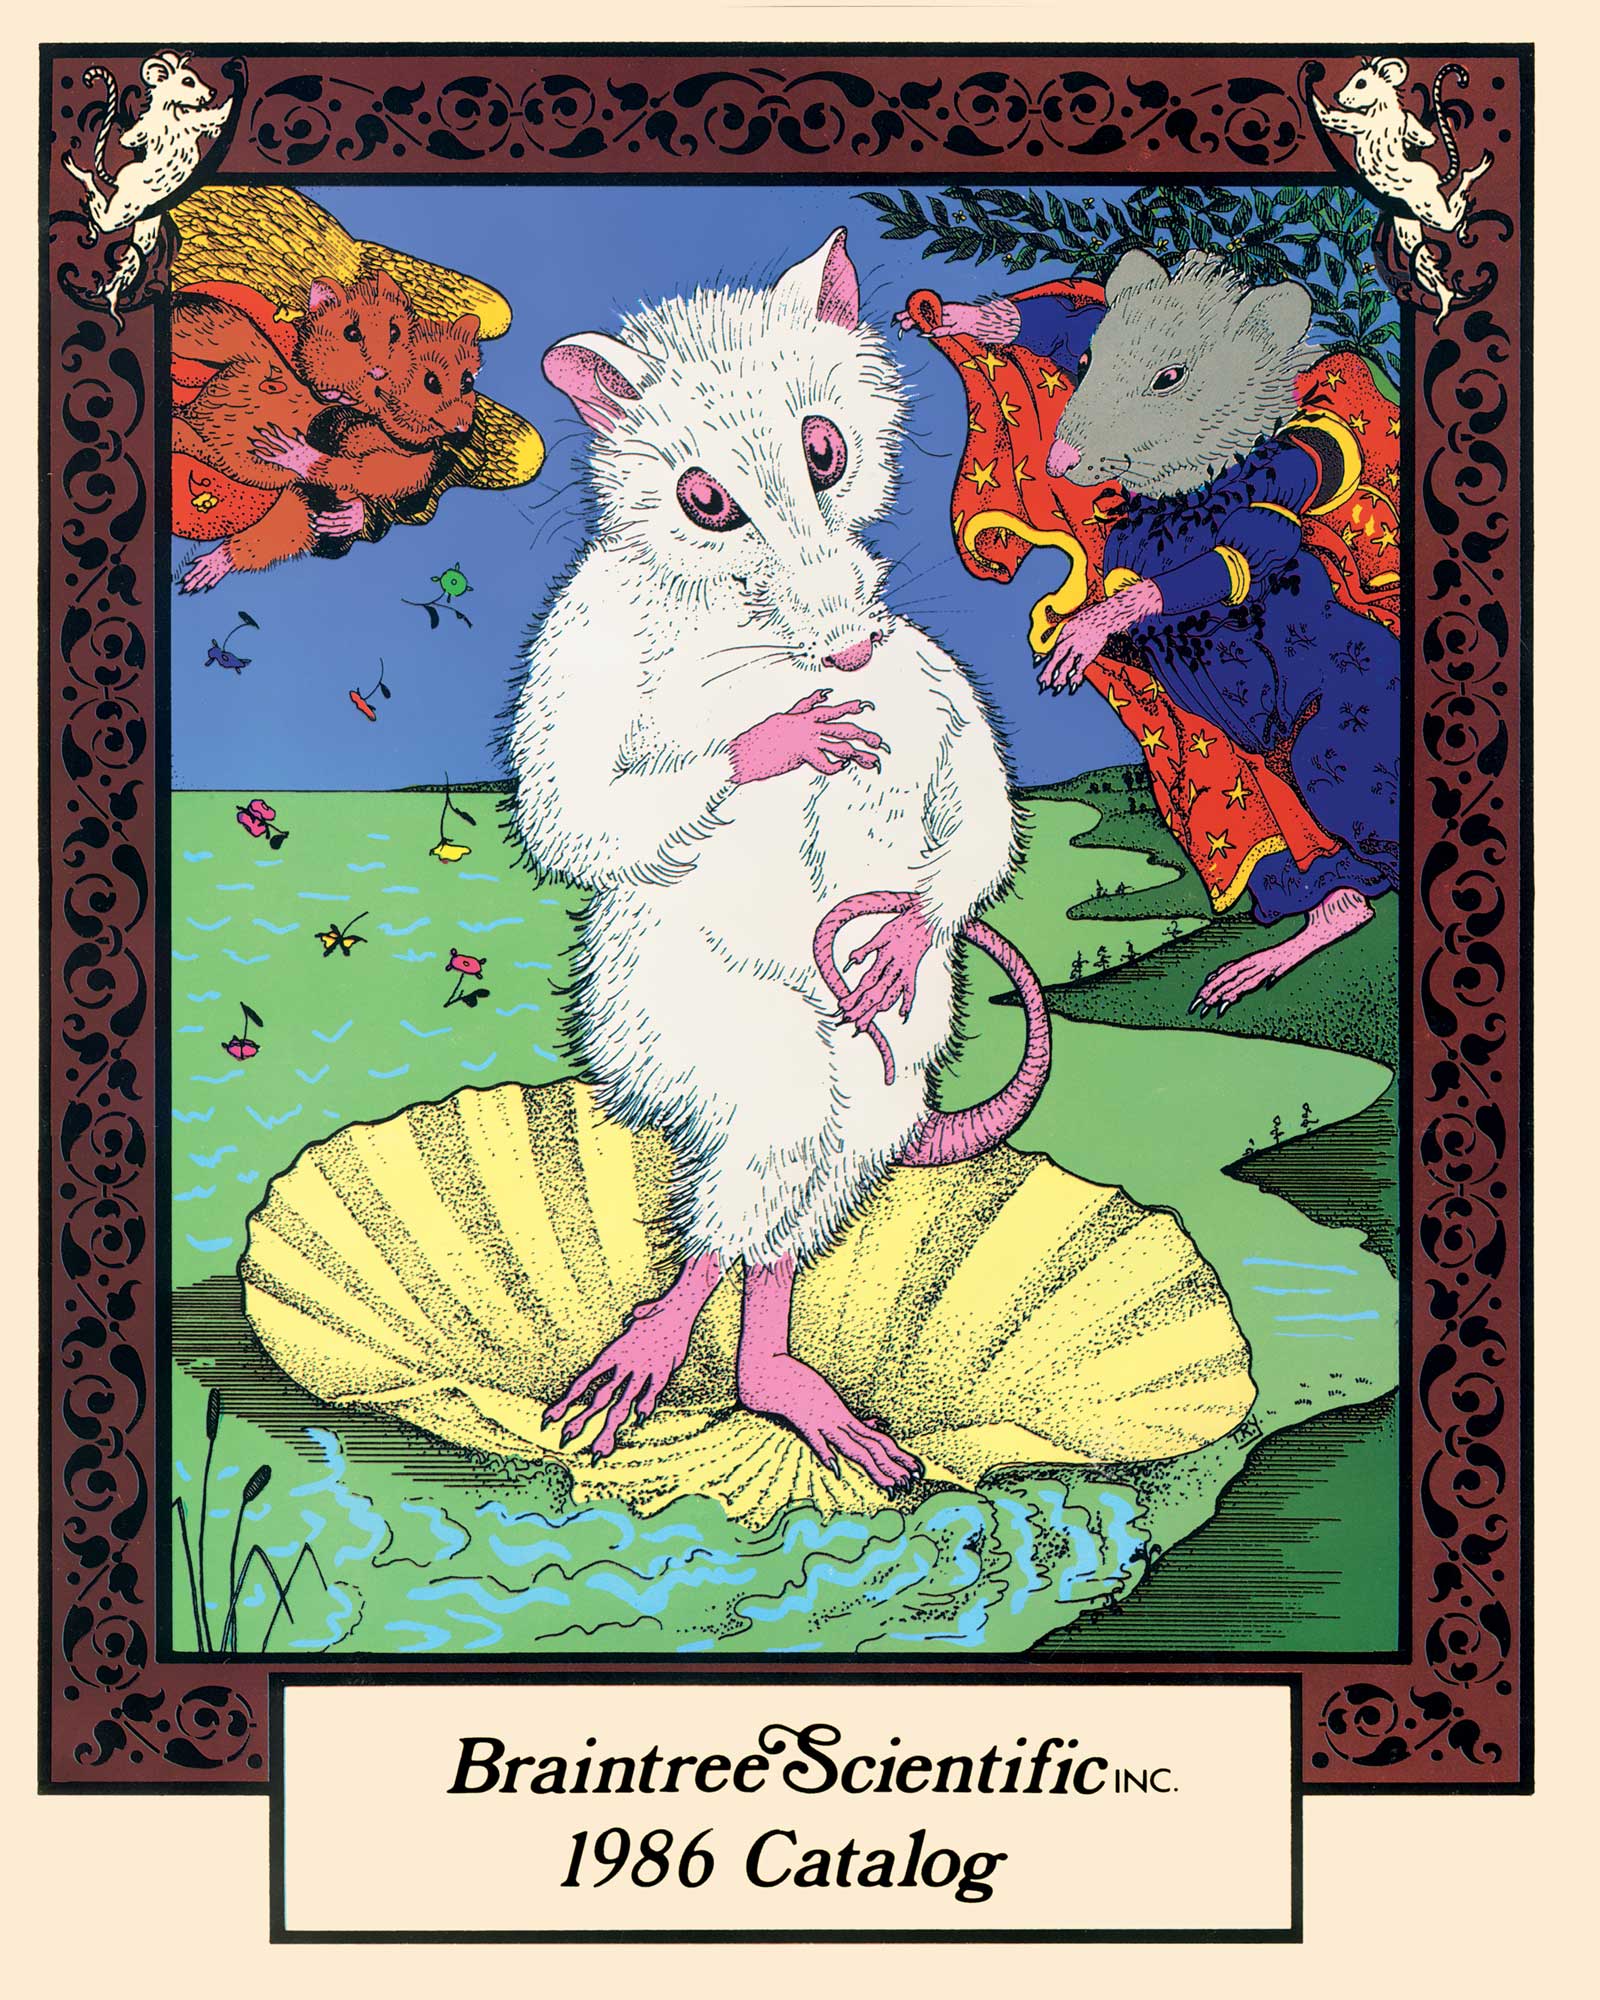 A cover of Braintree Scientific Incorporated’ nineteen eighty-six product catalog, depicting a reworking of Botticelli’s Birth of Venus in which all the figures are replaced with cartoon rats. The coy Venus-rat, who, lacking the long golden hair of Venus, resorts to using her tail to hide her genitals.